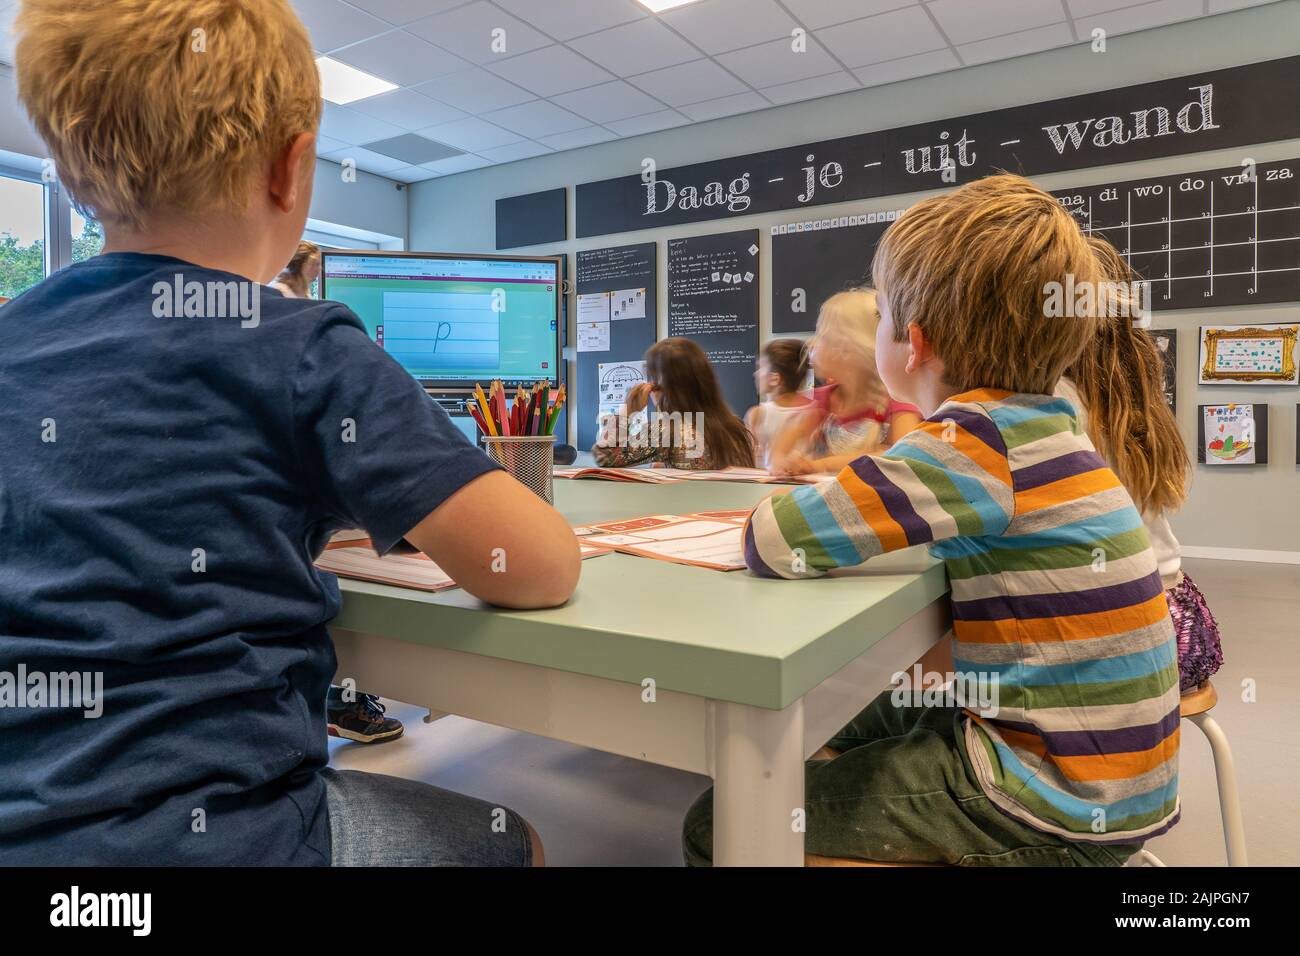 NIJMEGEN / NETHERLANDS-SEPTEMBER 13, 2019: children sitting in the classroom  listening to the teacherBlack boaed and smart board visible Stock Photo